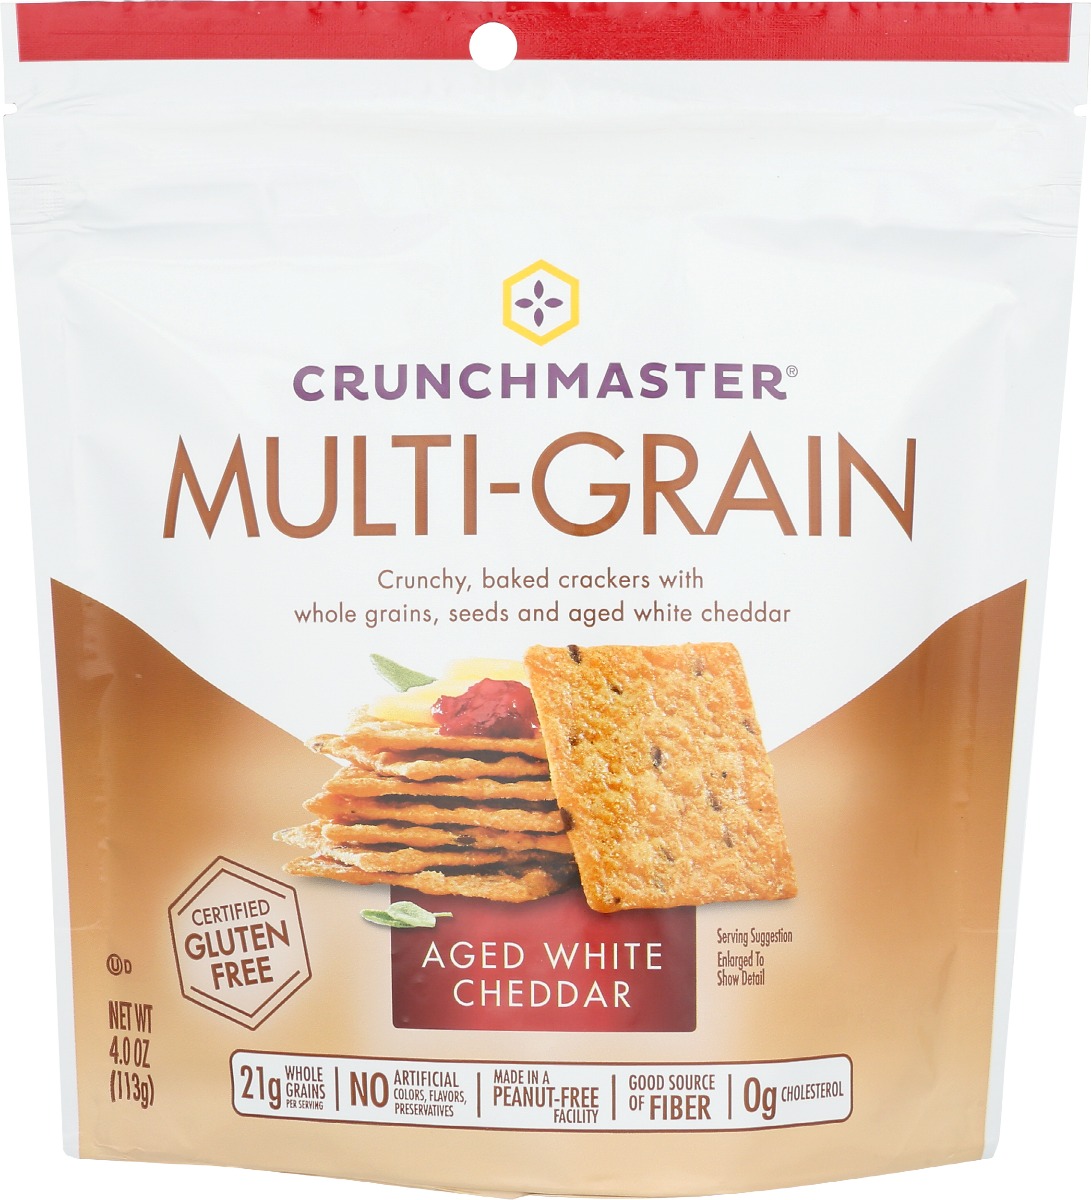 Picture of Crunchmaster KHRM00337635 4 oz Multigrain Aged White Cheddar